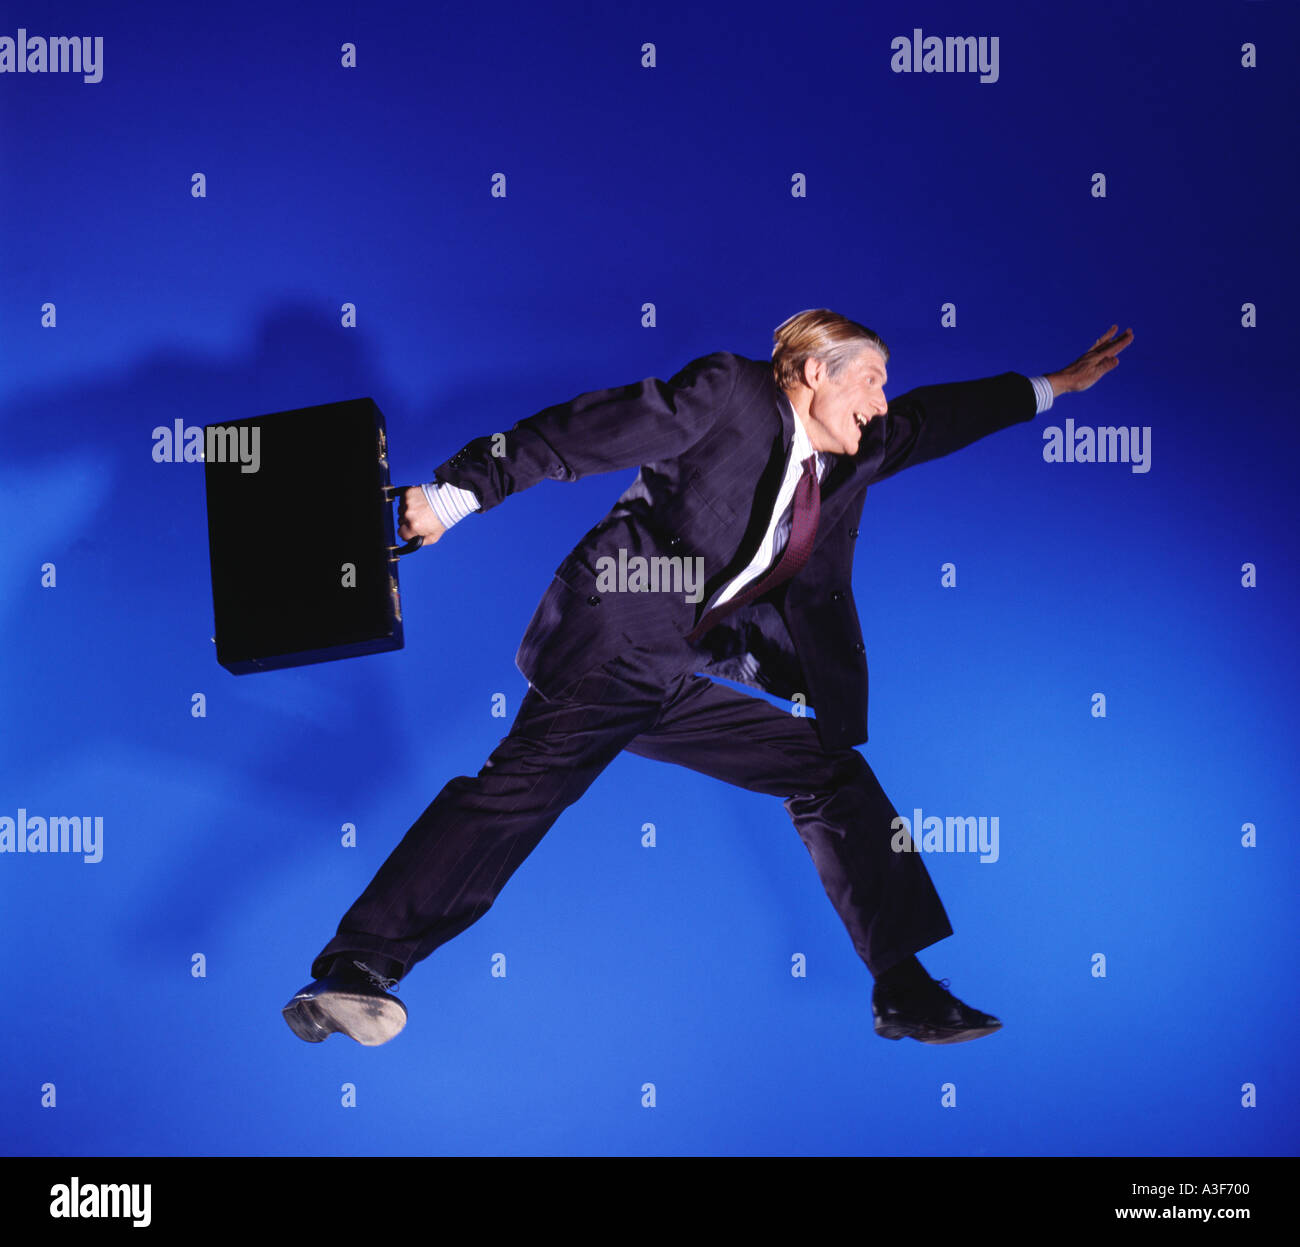 business man jumping in the air blue background Stock Photo